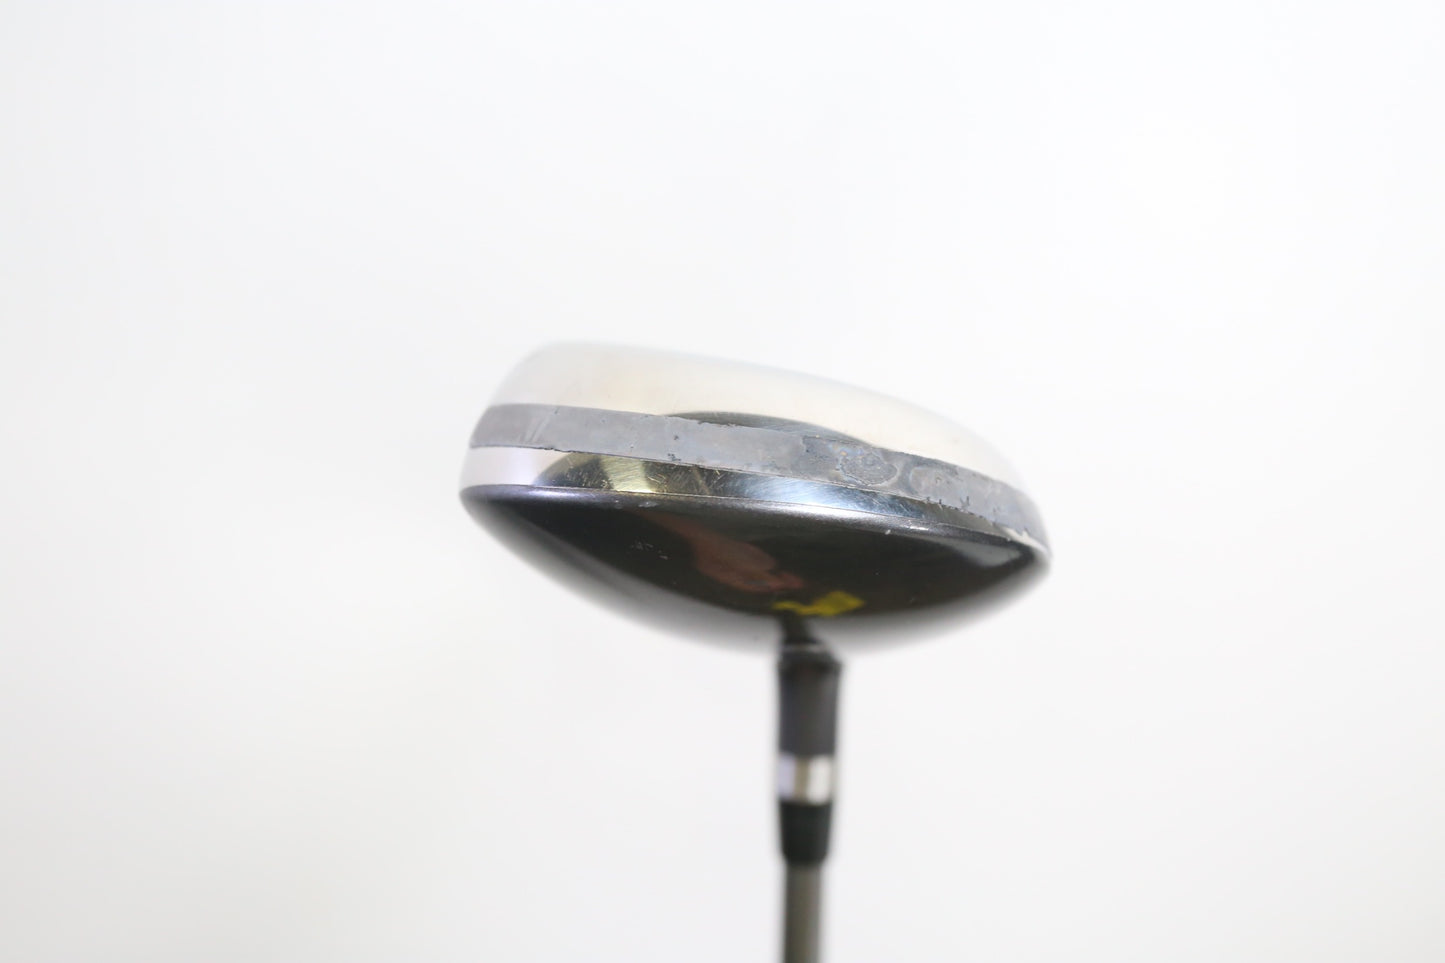 Used Cleveland Launcher 5-Wood - Right-Handed - 19 Degrees - Regular Flex